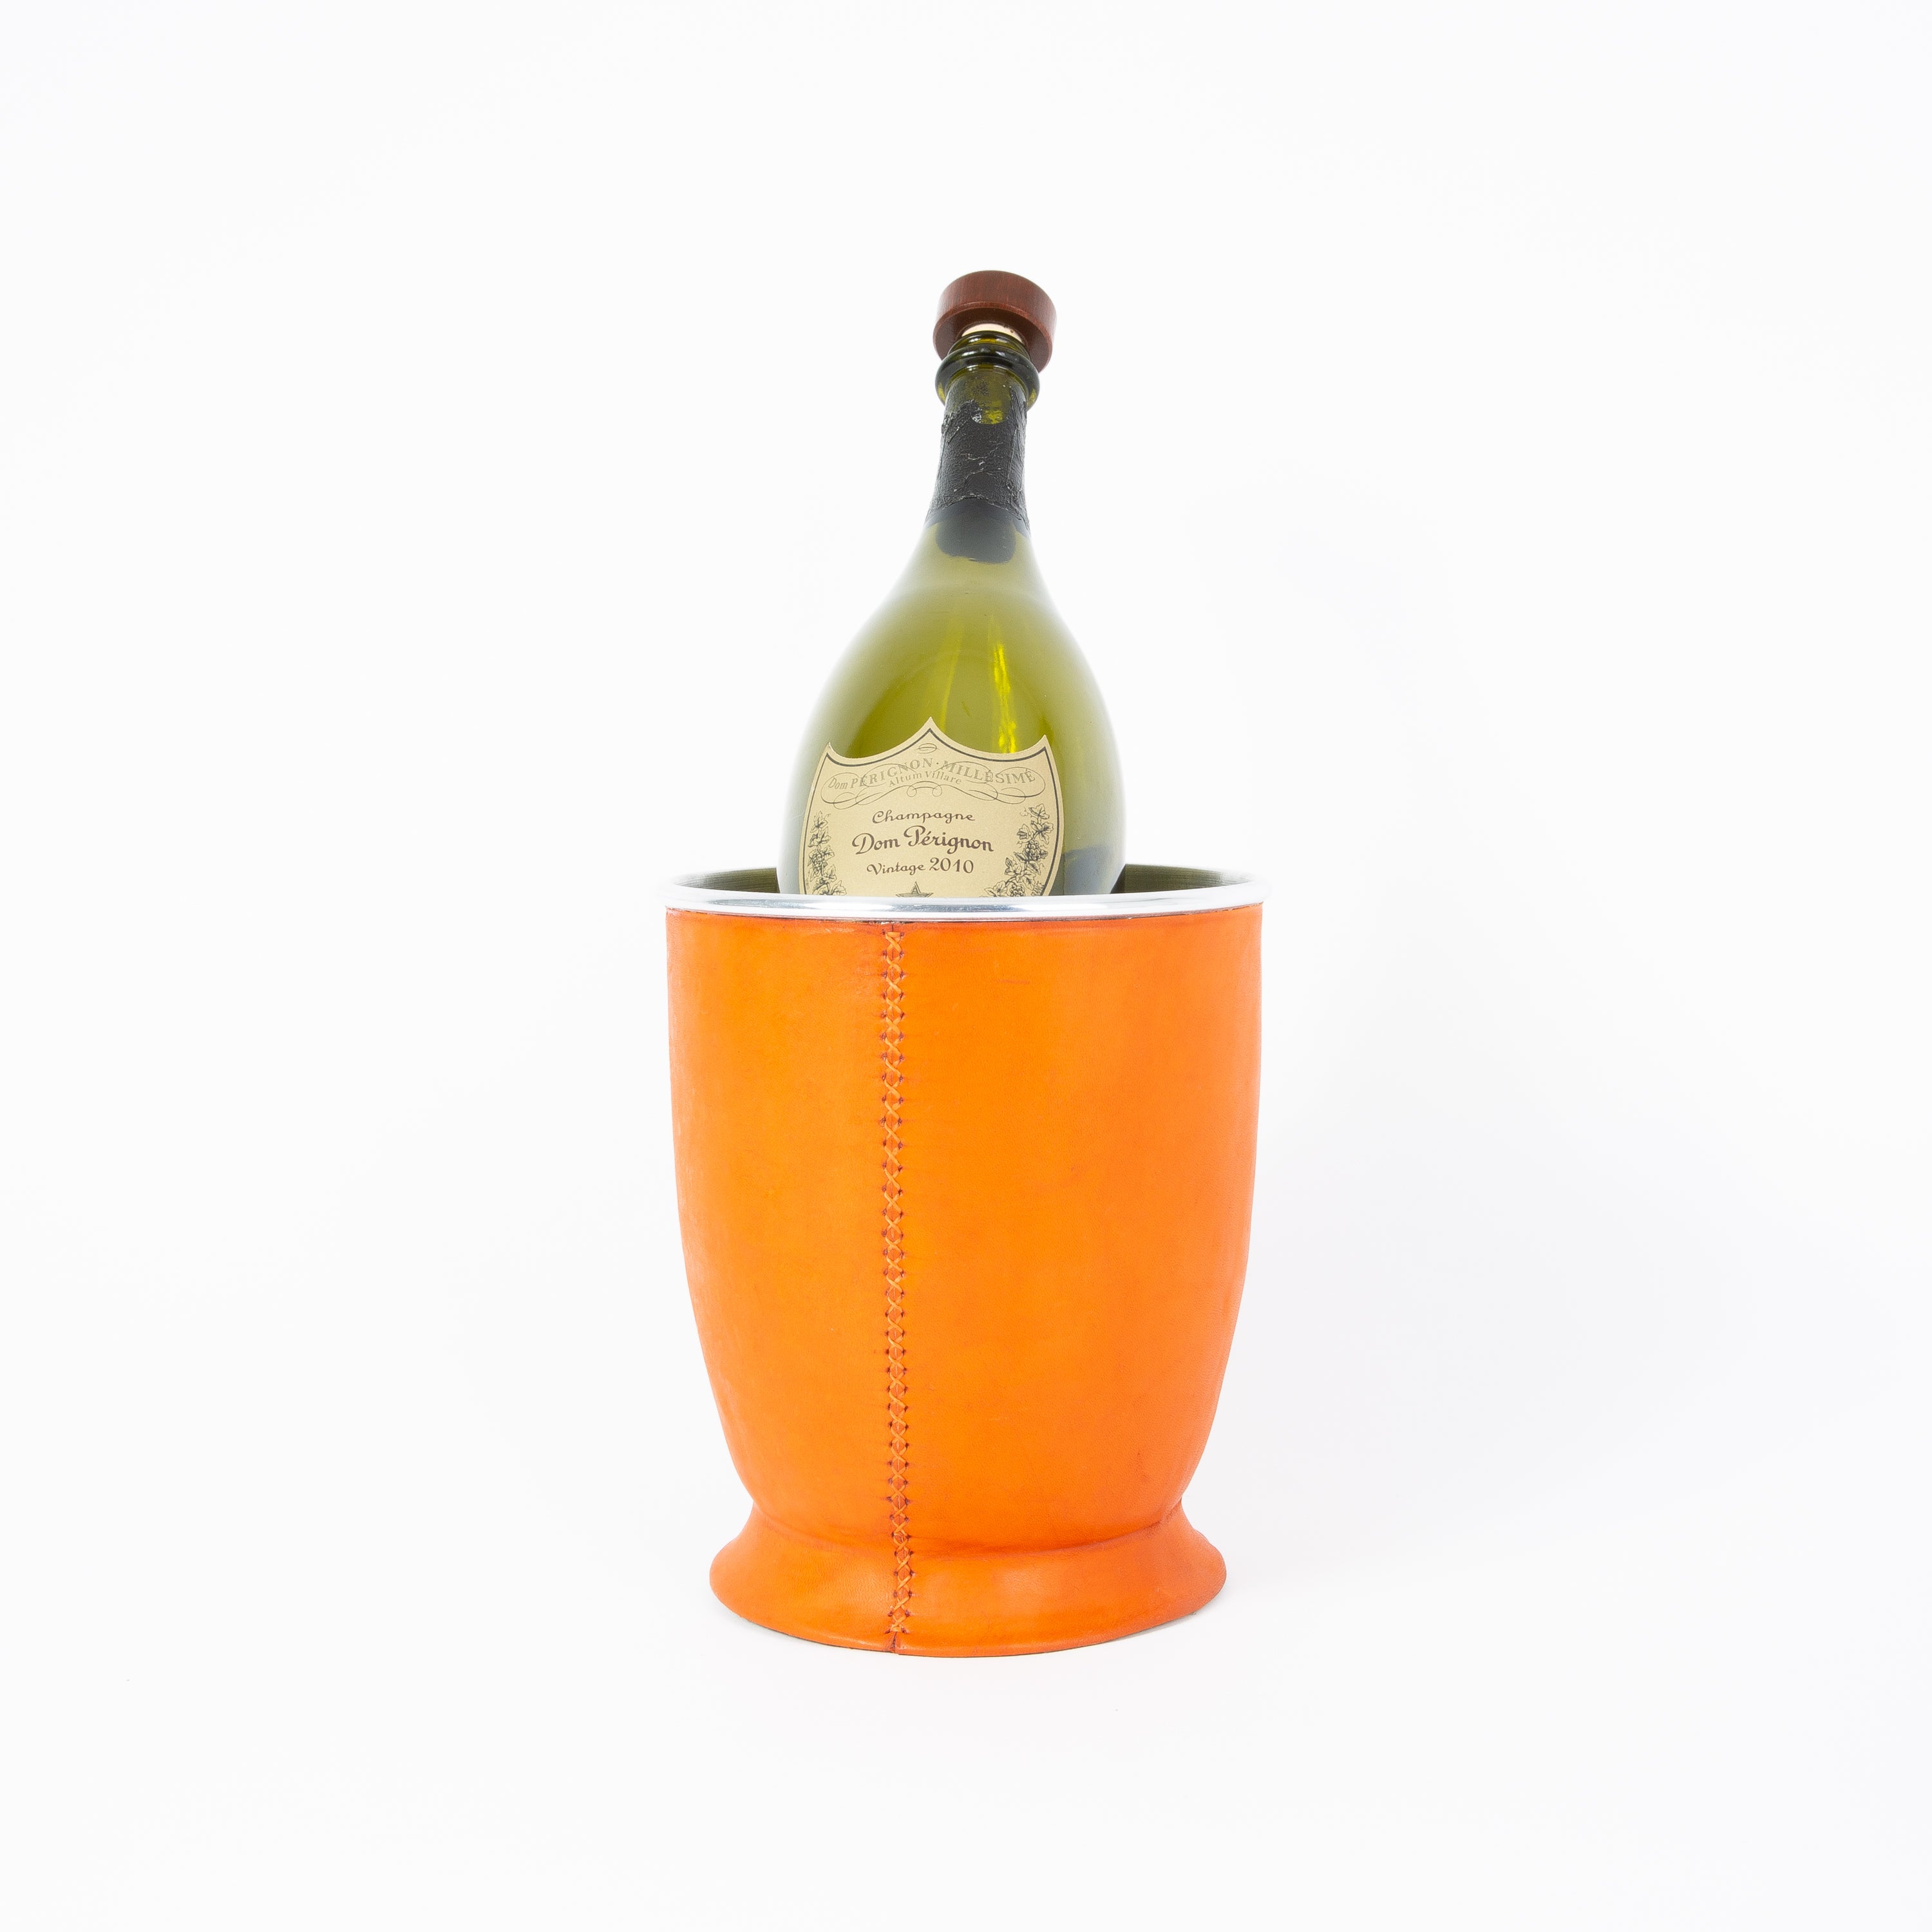 Orange Leather Champagne Bucket  | Leather Pitcher | Leather Bucket | Leather Vase | Leather Cooler | Leather Home Goods | Home Goods | Home and Garden | Interior Design | Leather Tablewares | Leather Barwares | Leather Accessories | Bati Leather Goods